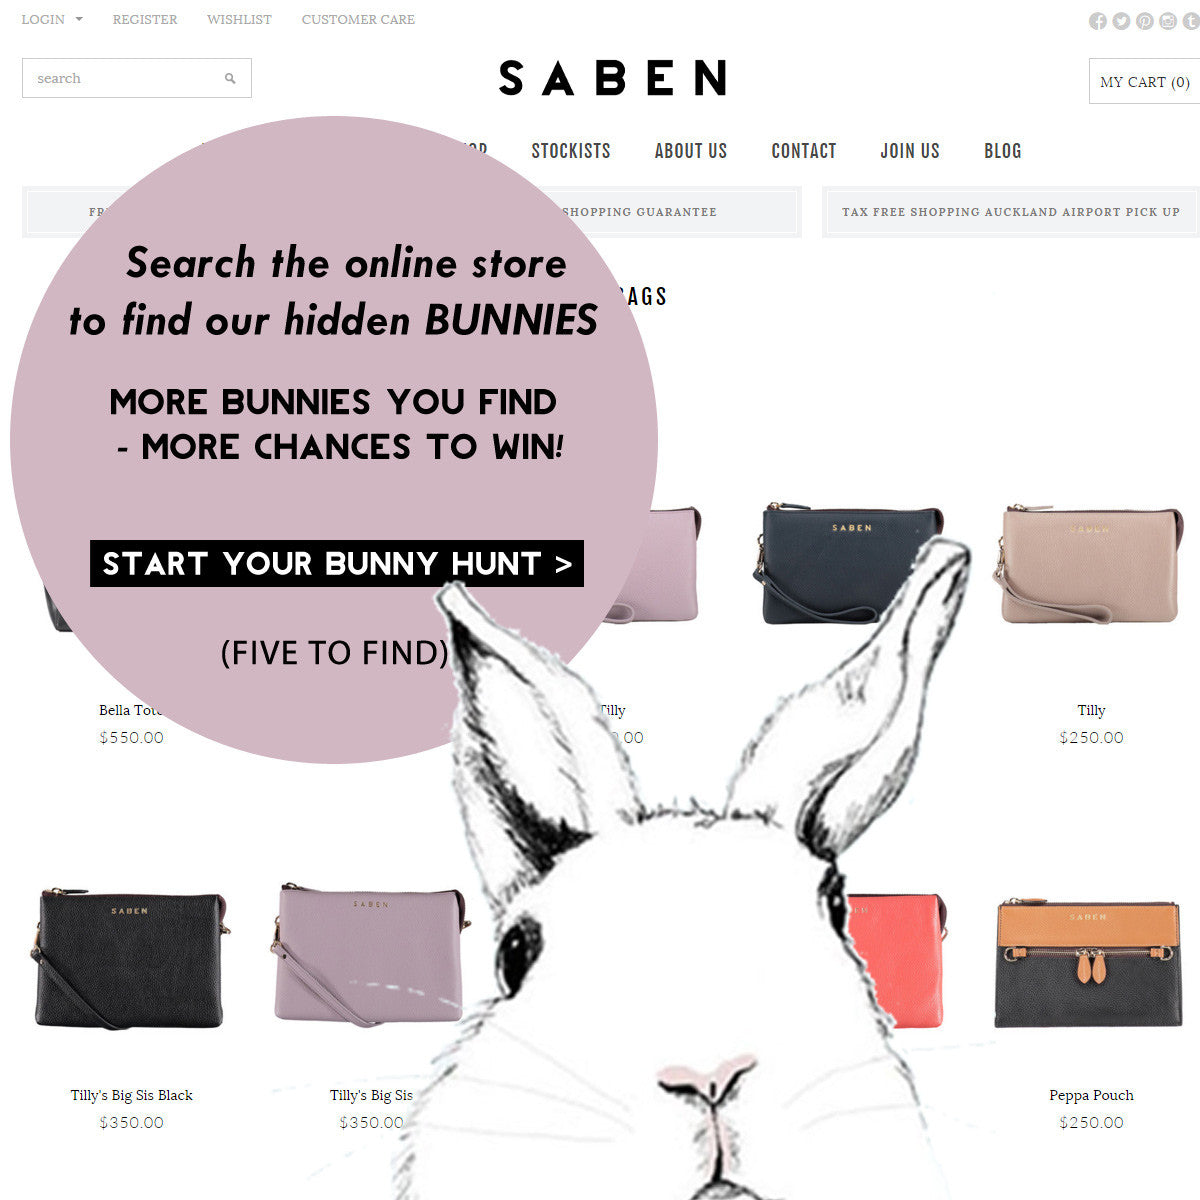 Join our bunny hunt & be in to WIN a Saben Big Sis Tilly!